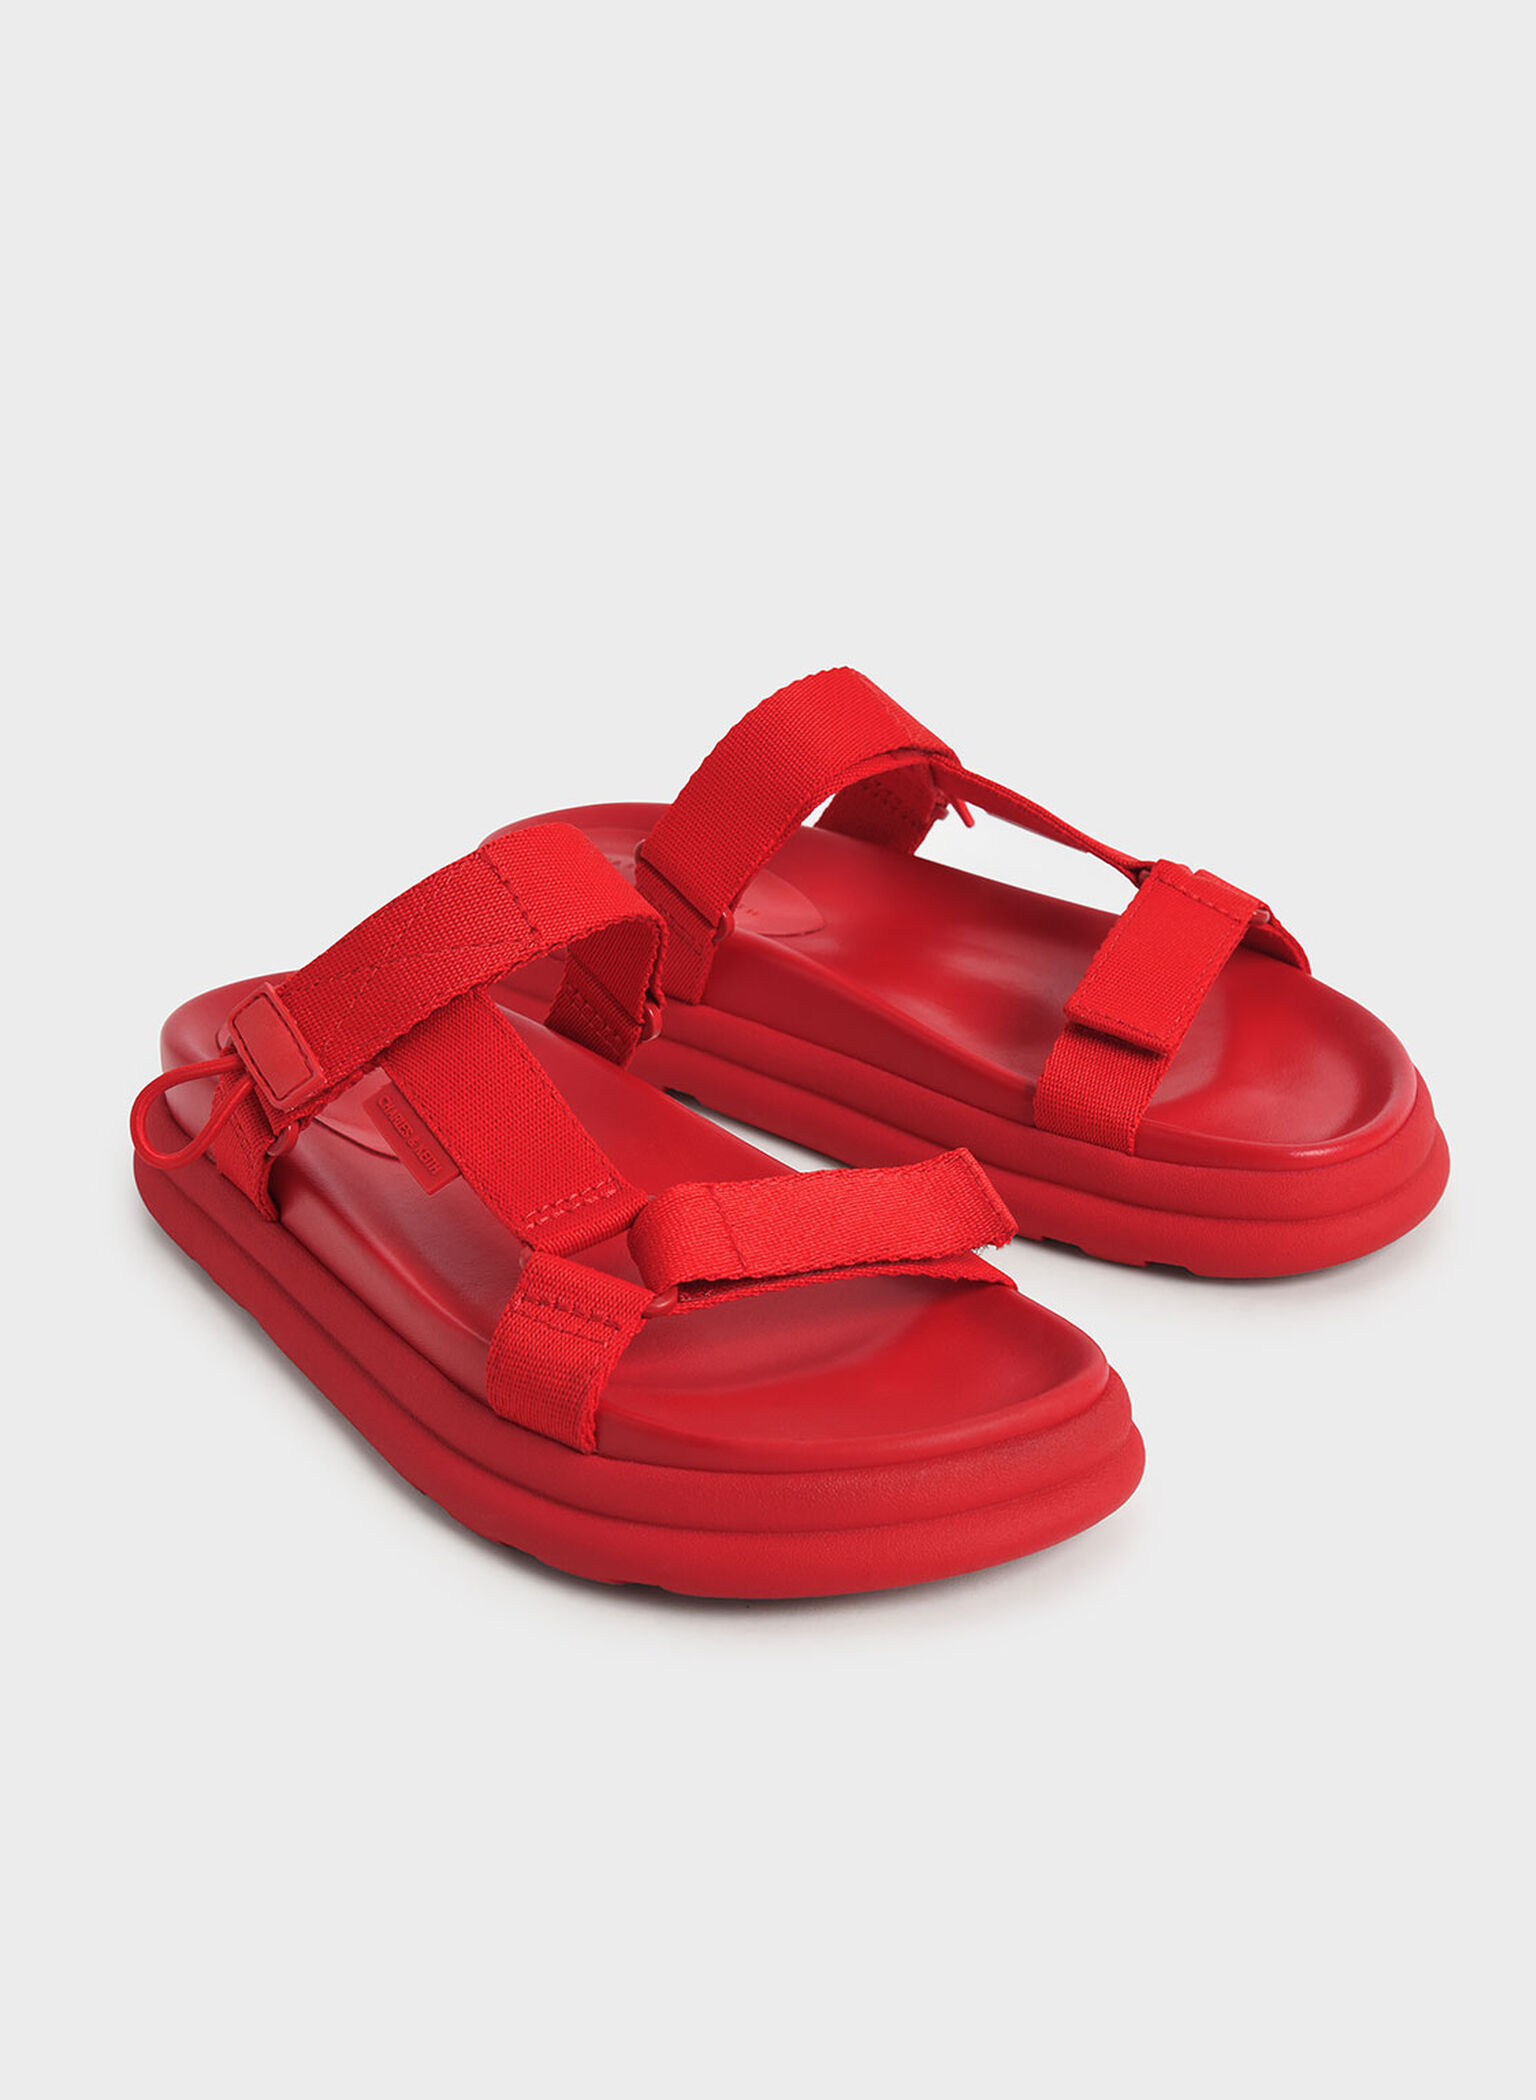 Polyester Velcro Strap Sports Sandals, Red, hi-res